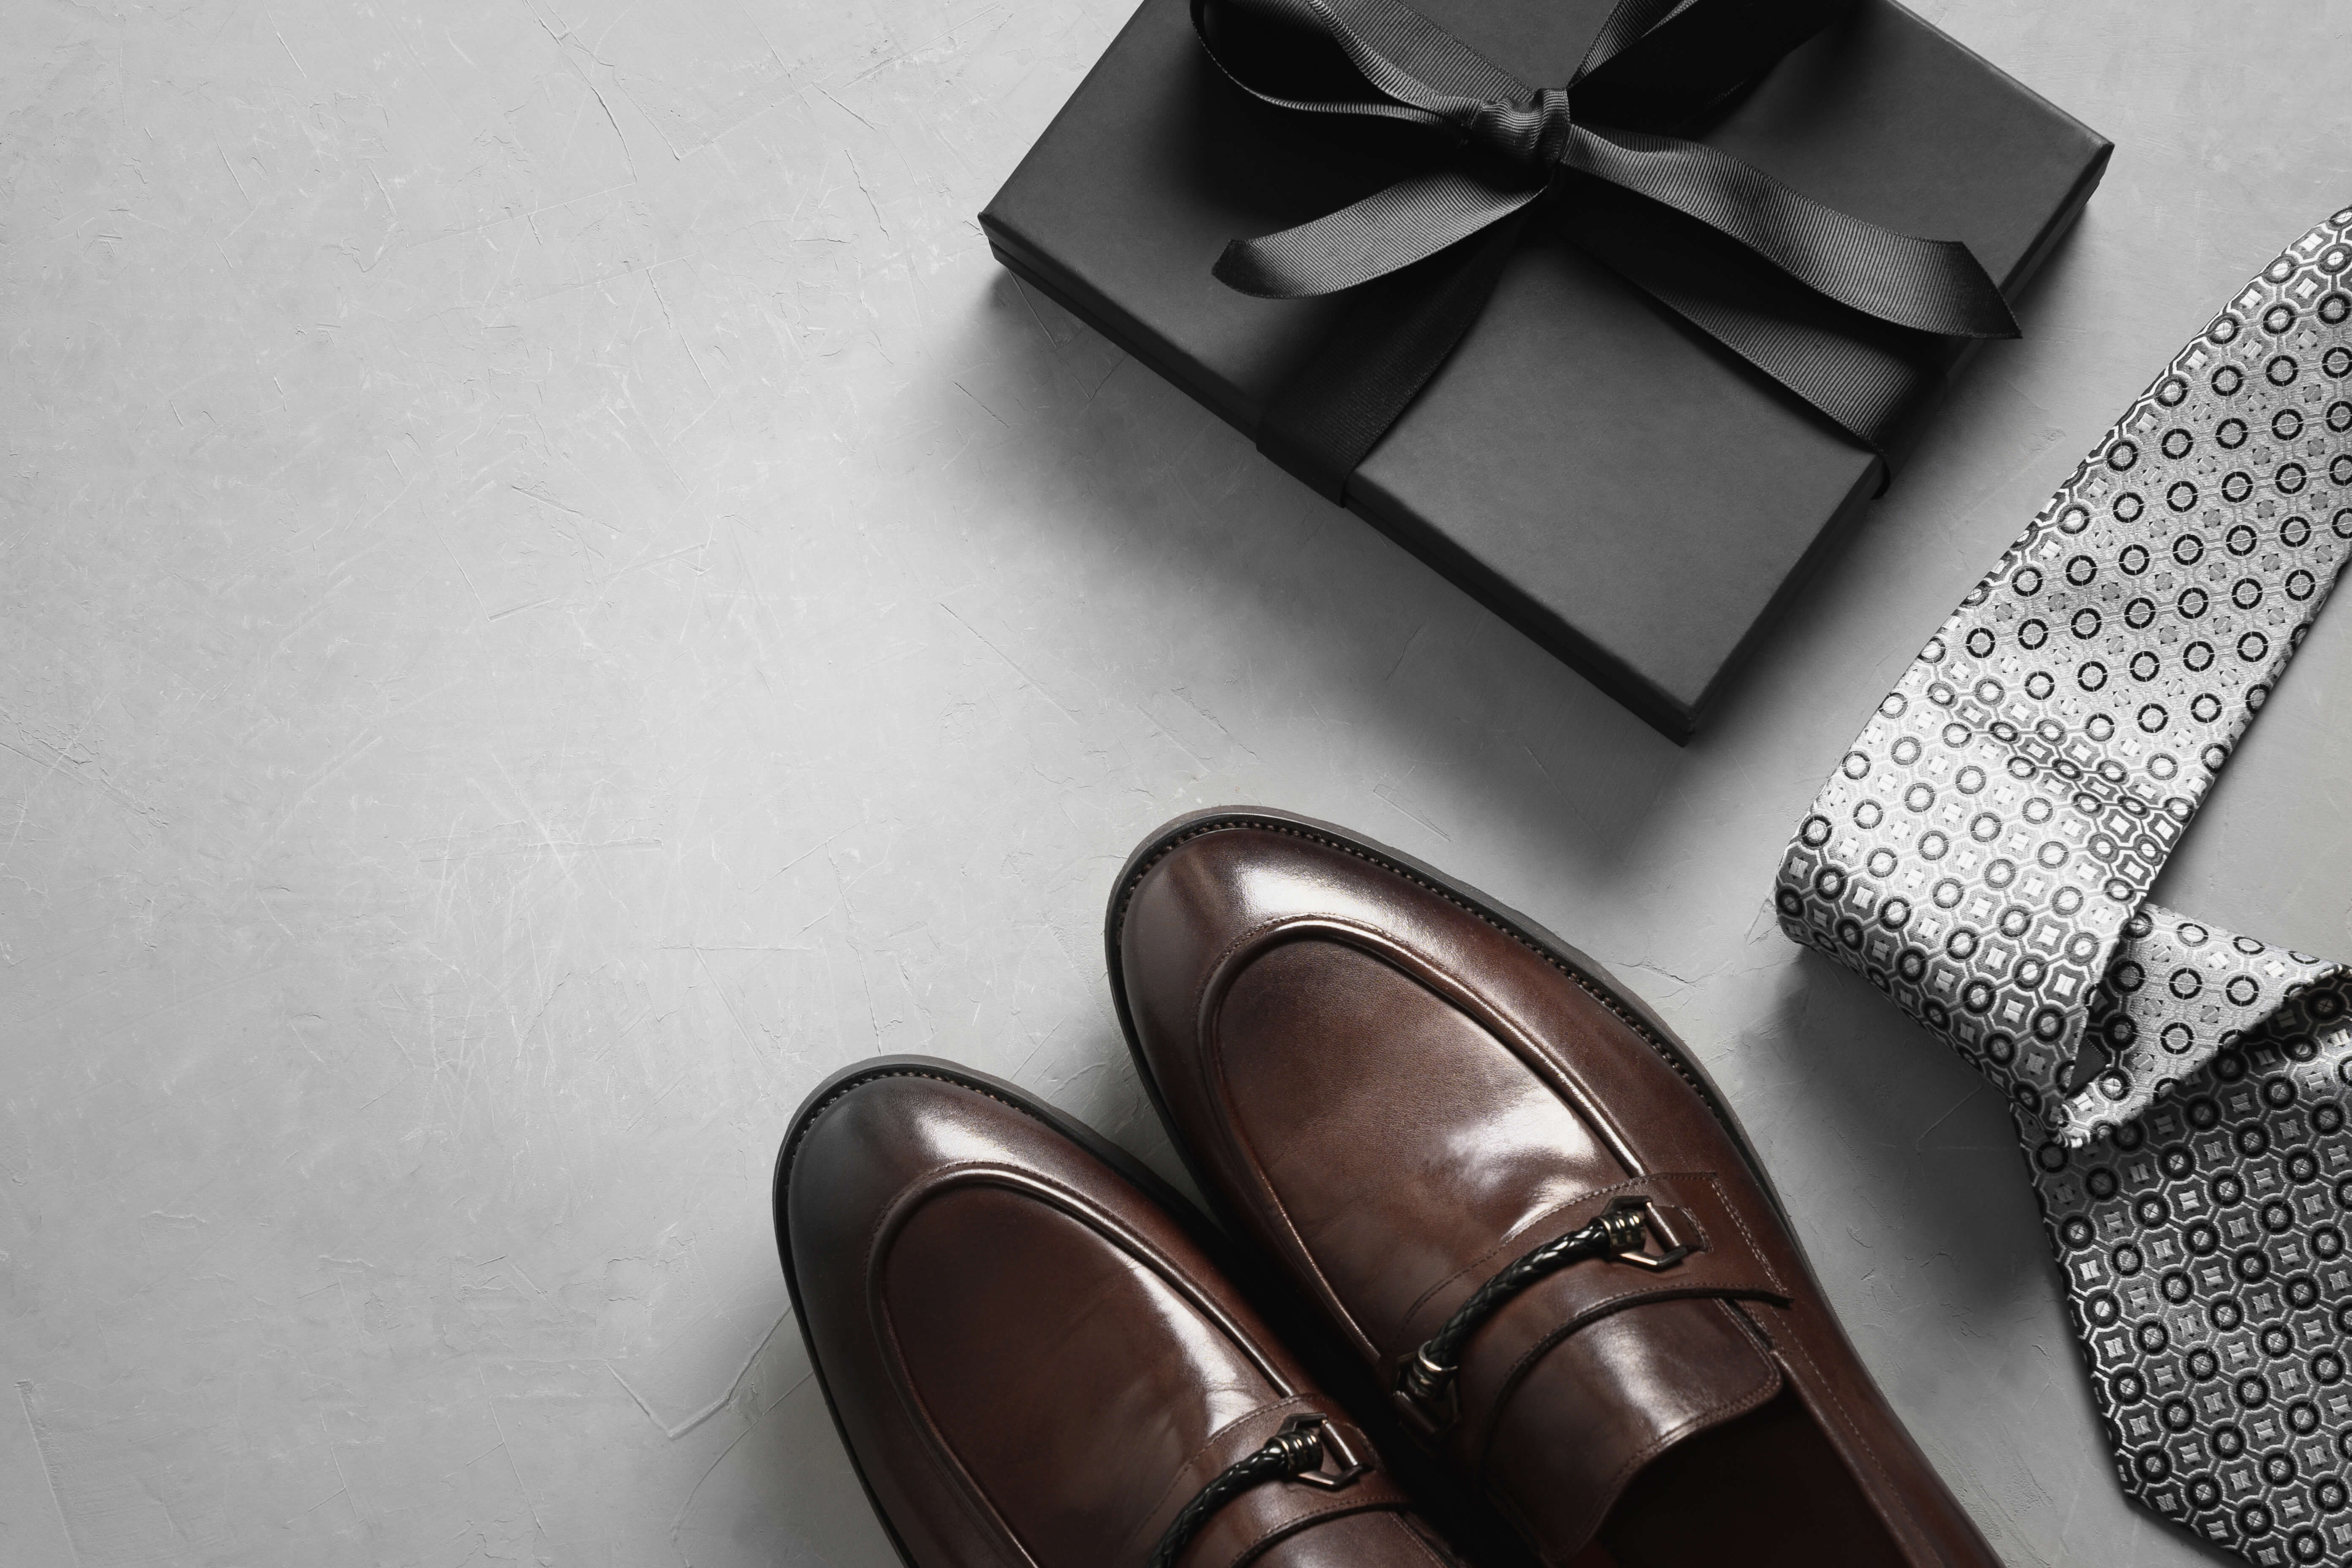 Accessories that one can wear with brown shoes. Black box and grey tie.